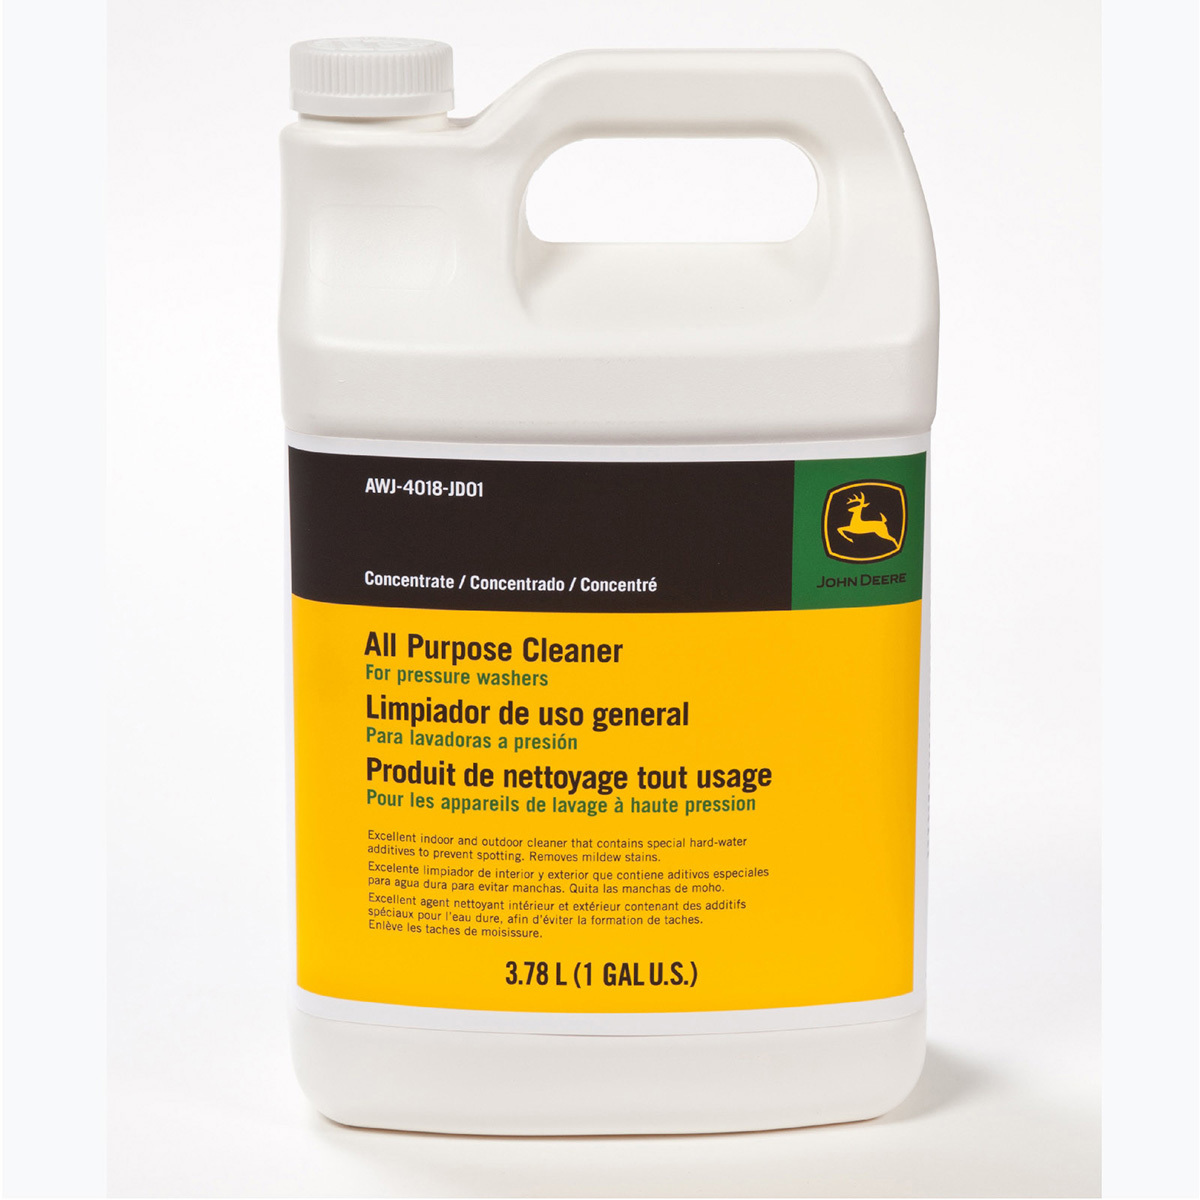 All Purpose Cleaner for use with Pressure Washers (AW-4018-JD01)